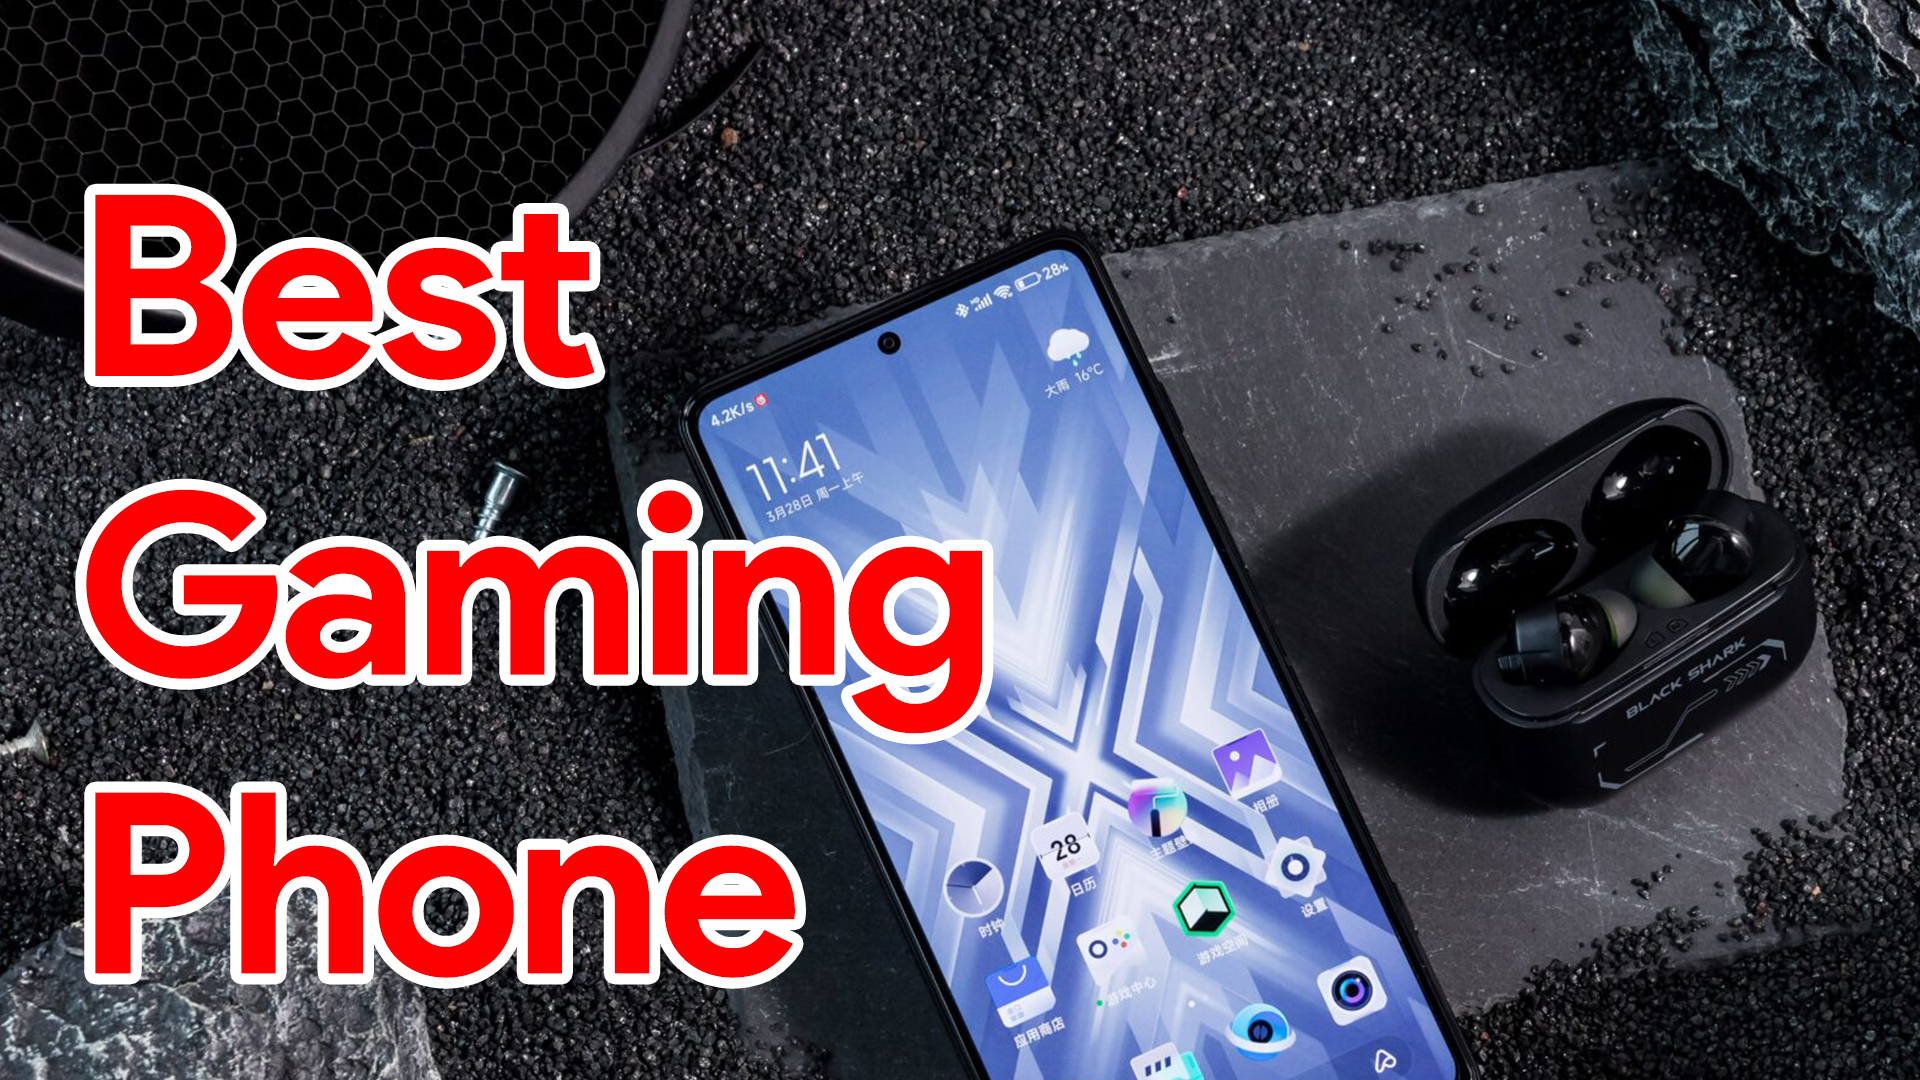 Top 5 features of best gaming phone in the world Blackshark 5 Pro